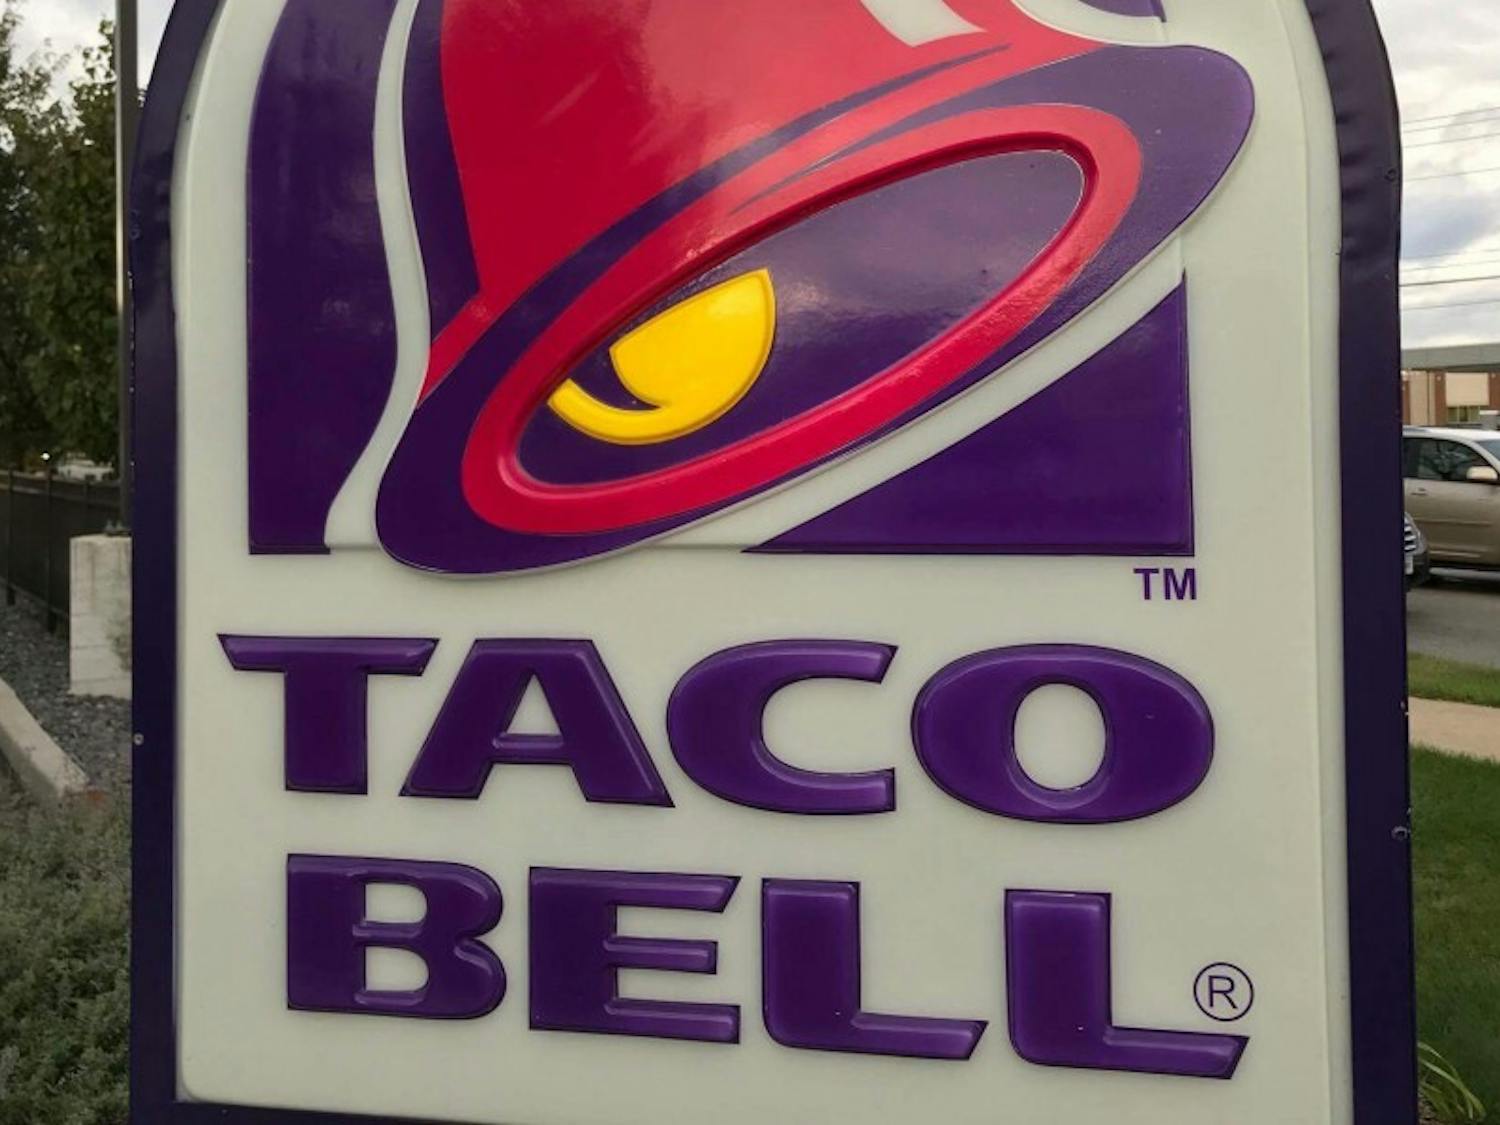 After Mayor Paul Soglin and Common Council clashed over the sale of alcohol at Taco Bell’s State Street location, the chain is suing for unfair denial of their liquor license.